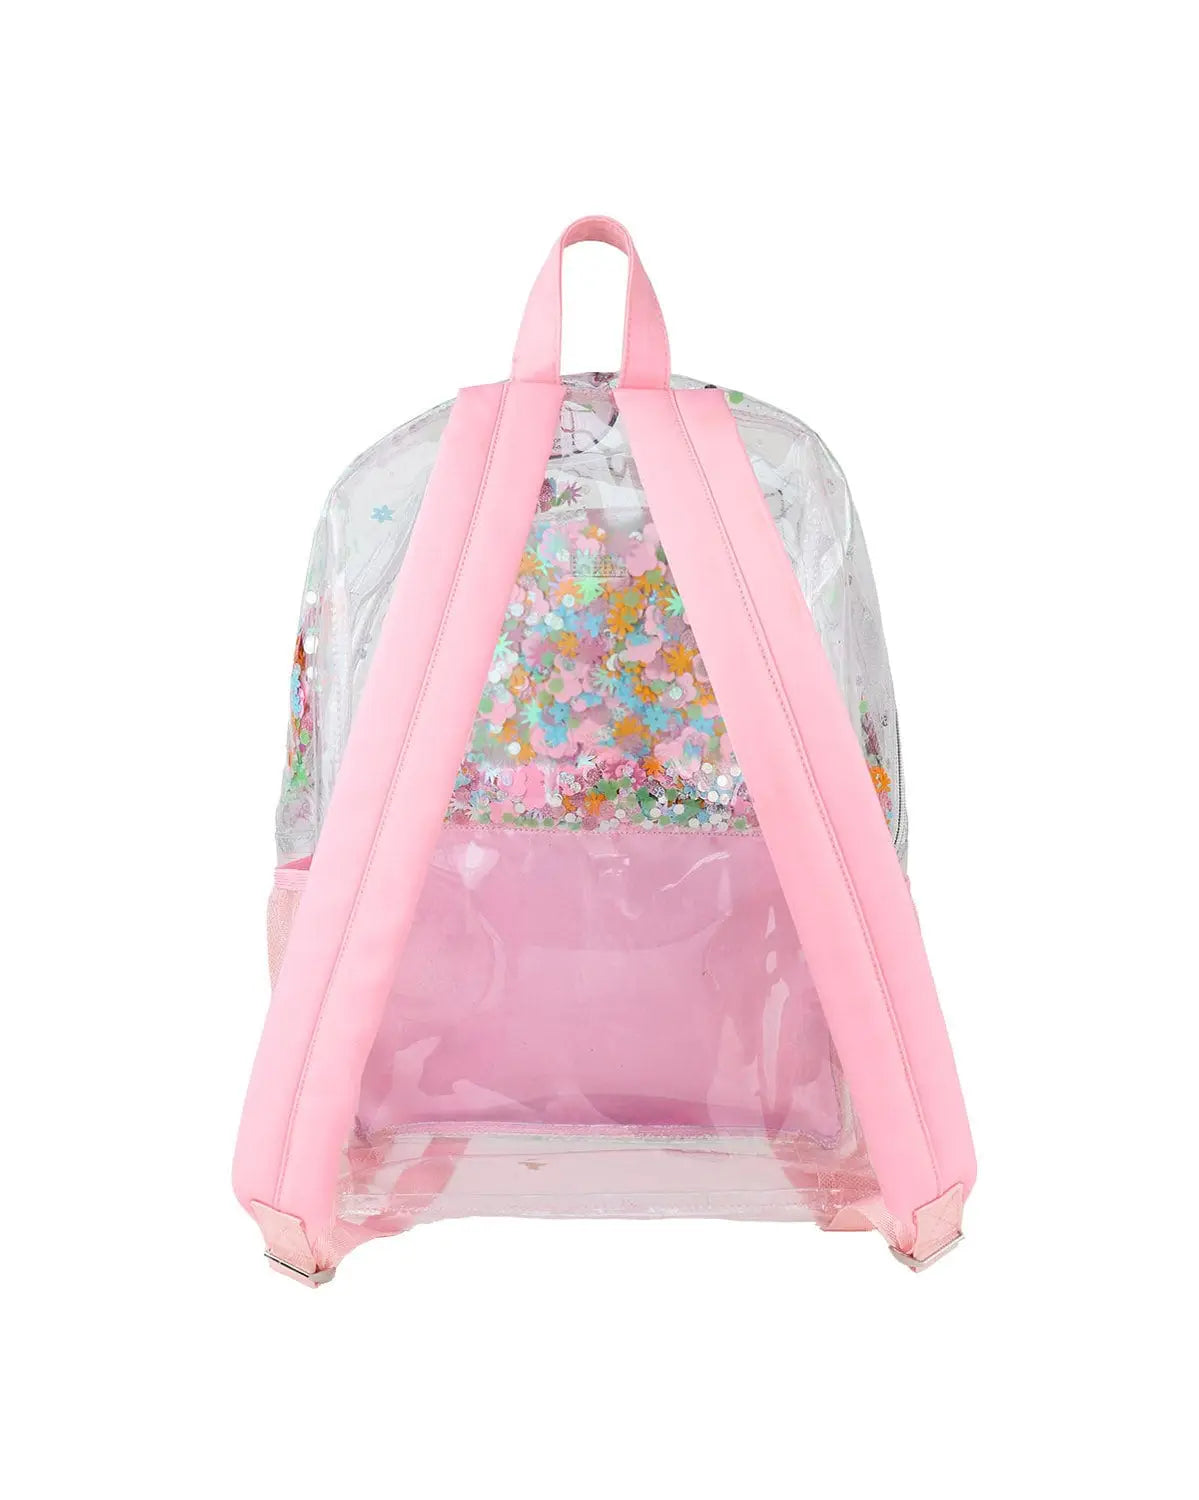 Shop Packed Party Flower Shop Confetti Clear Backpack - Premium Backpack from Packed Party Online now at Spoiled Brat 